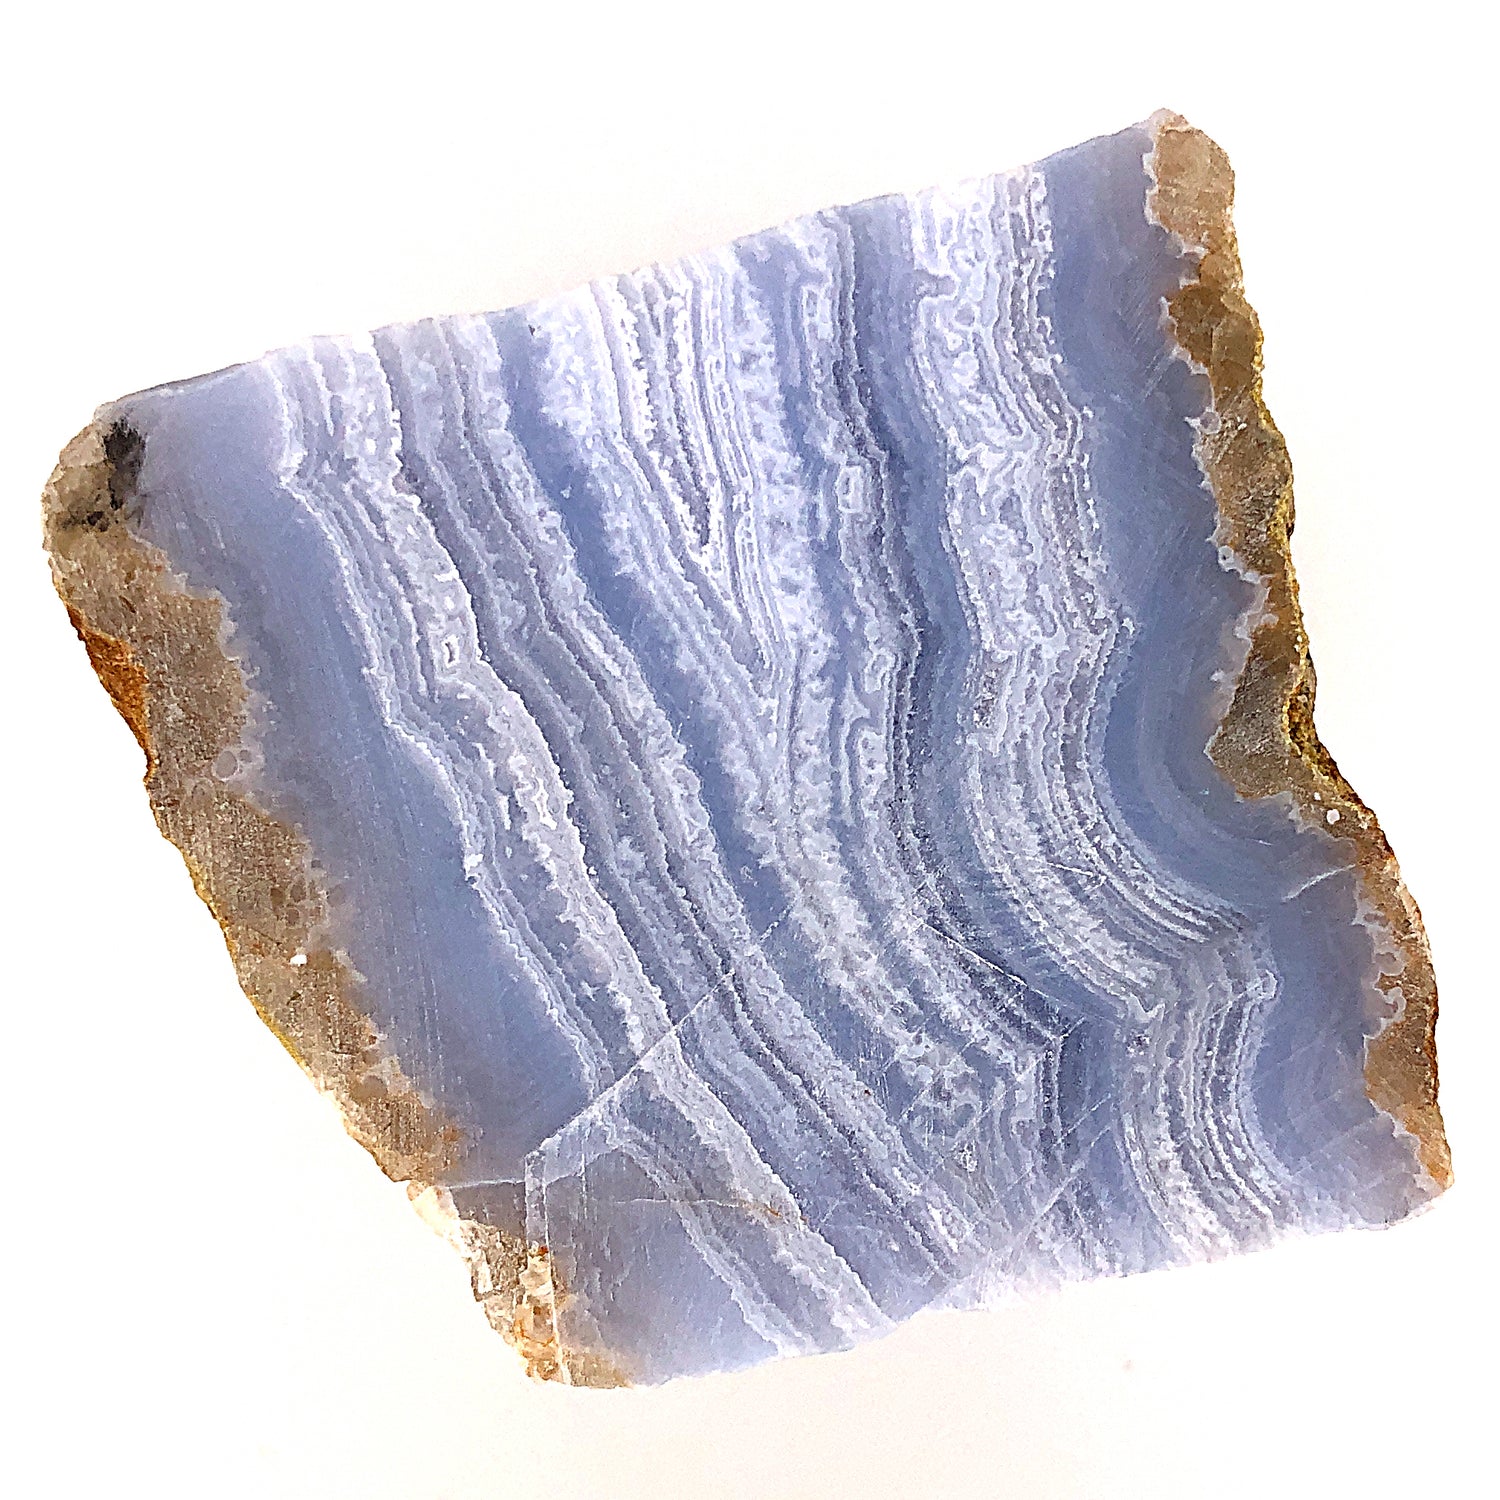 material: blue lace agate